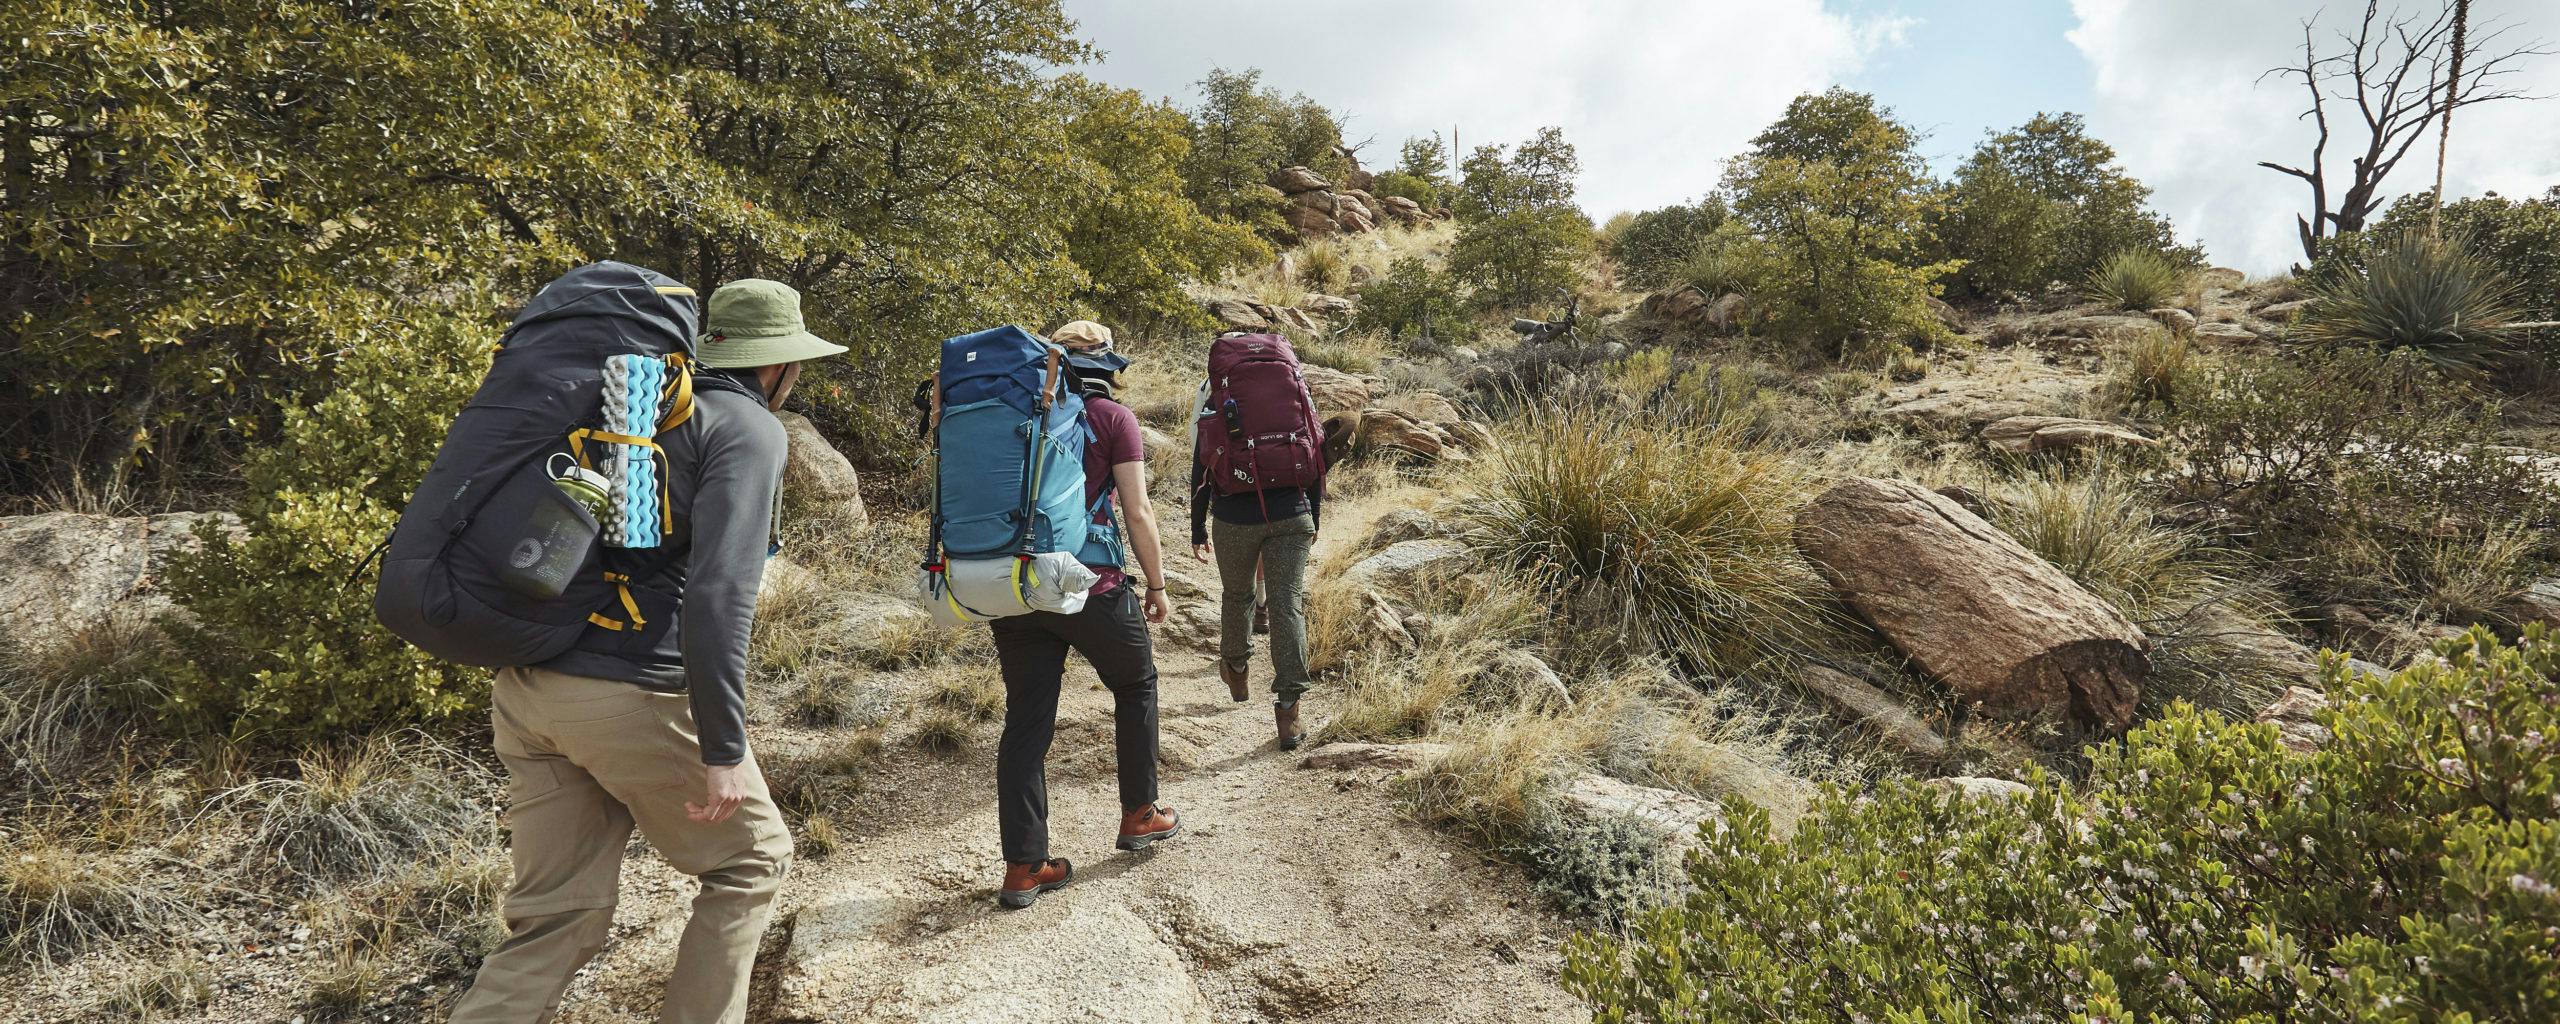 The Ultimate Backpacking Checklist